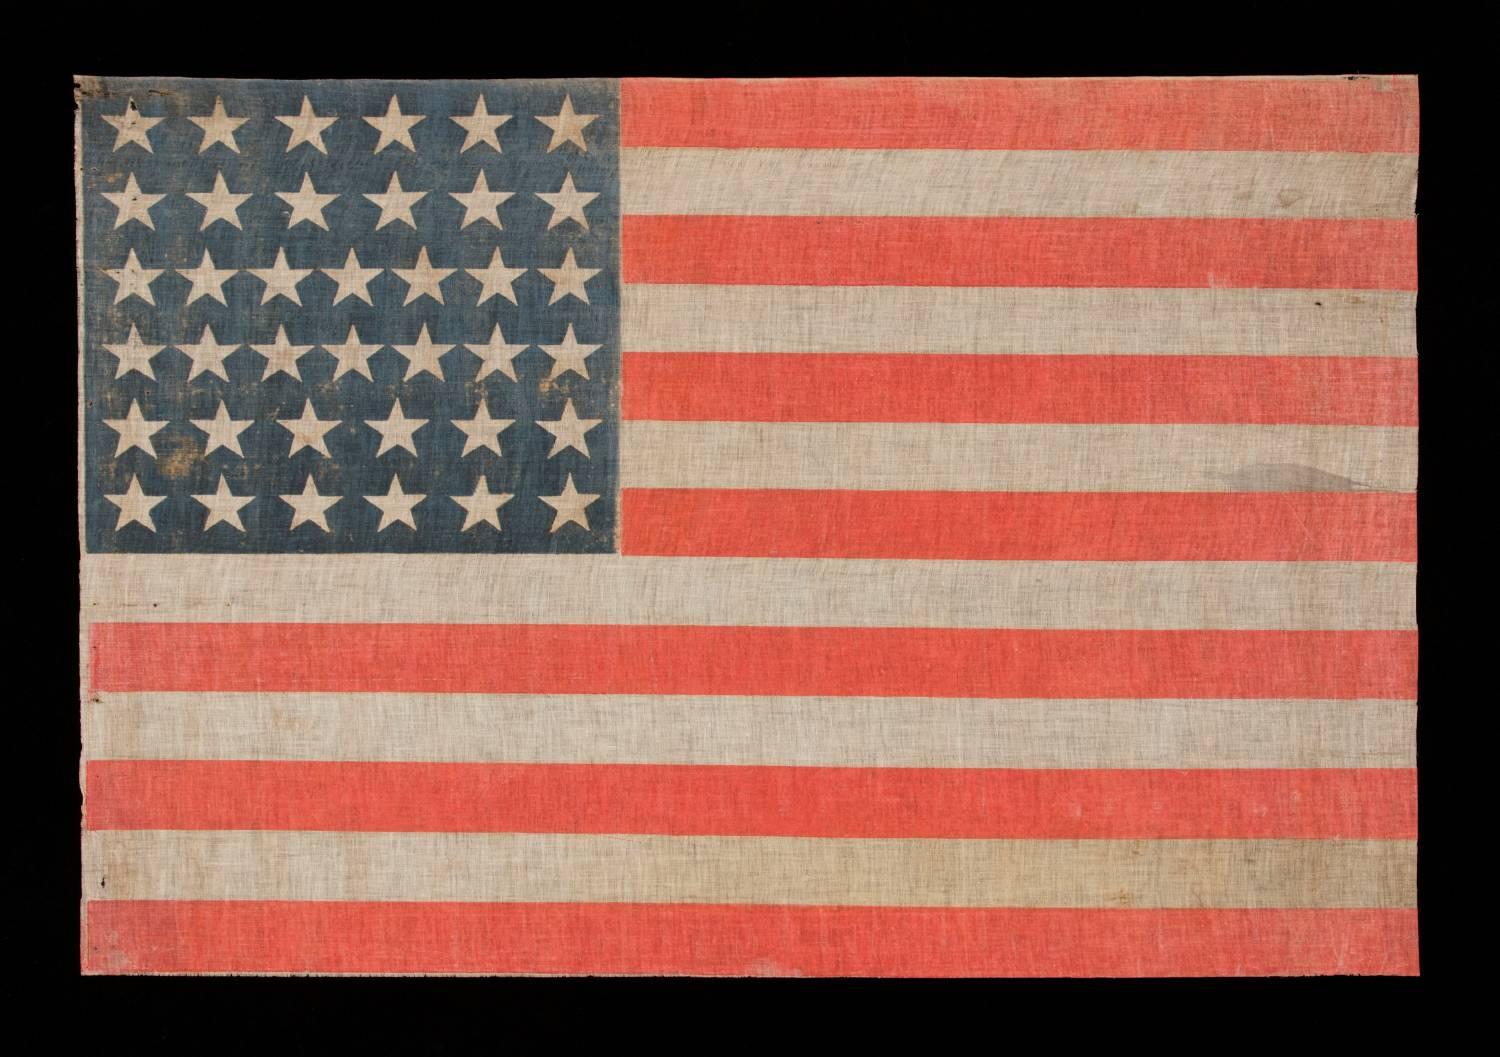 38 stars on a parade flag with especially large-scale and beautiful, persimmon red stripes, Colorado statehood, 1876-1889:

38 star American national parade flag, printed on coarse, glazed cotton. The stars are arranged in justified rows of